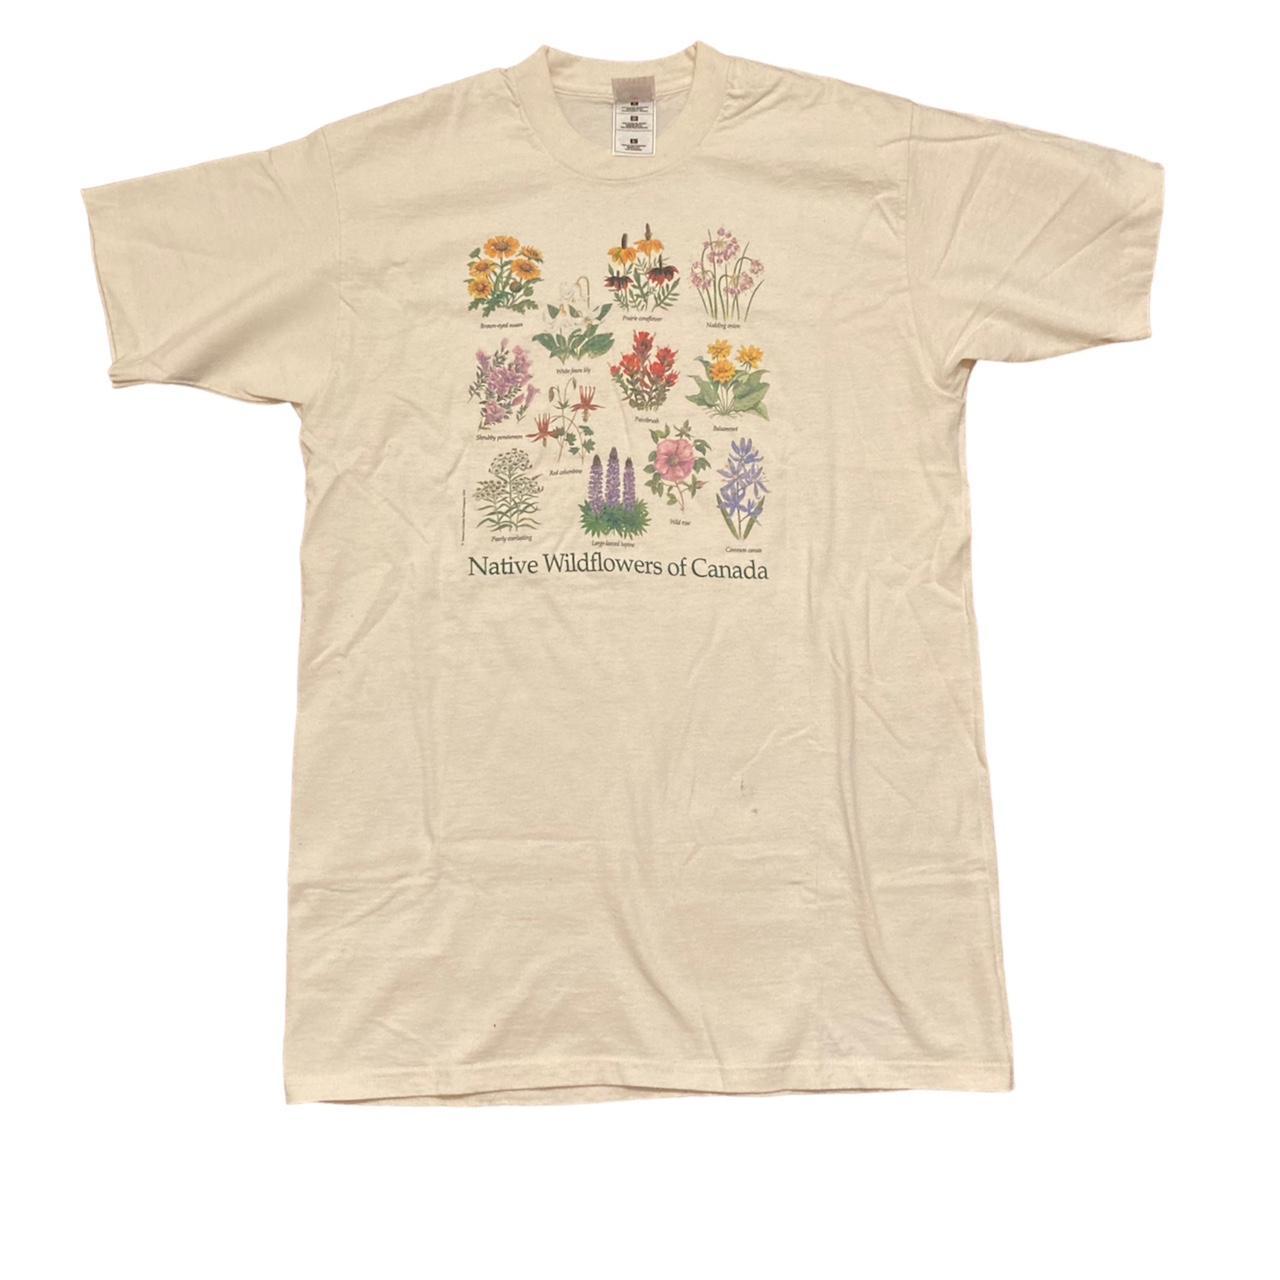 Fruit of the Loom Men's Cream and Purple T-shirt